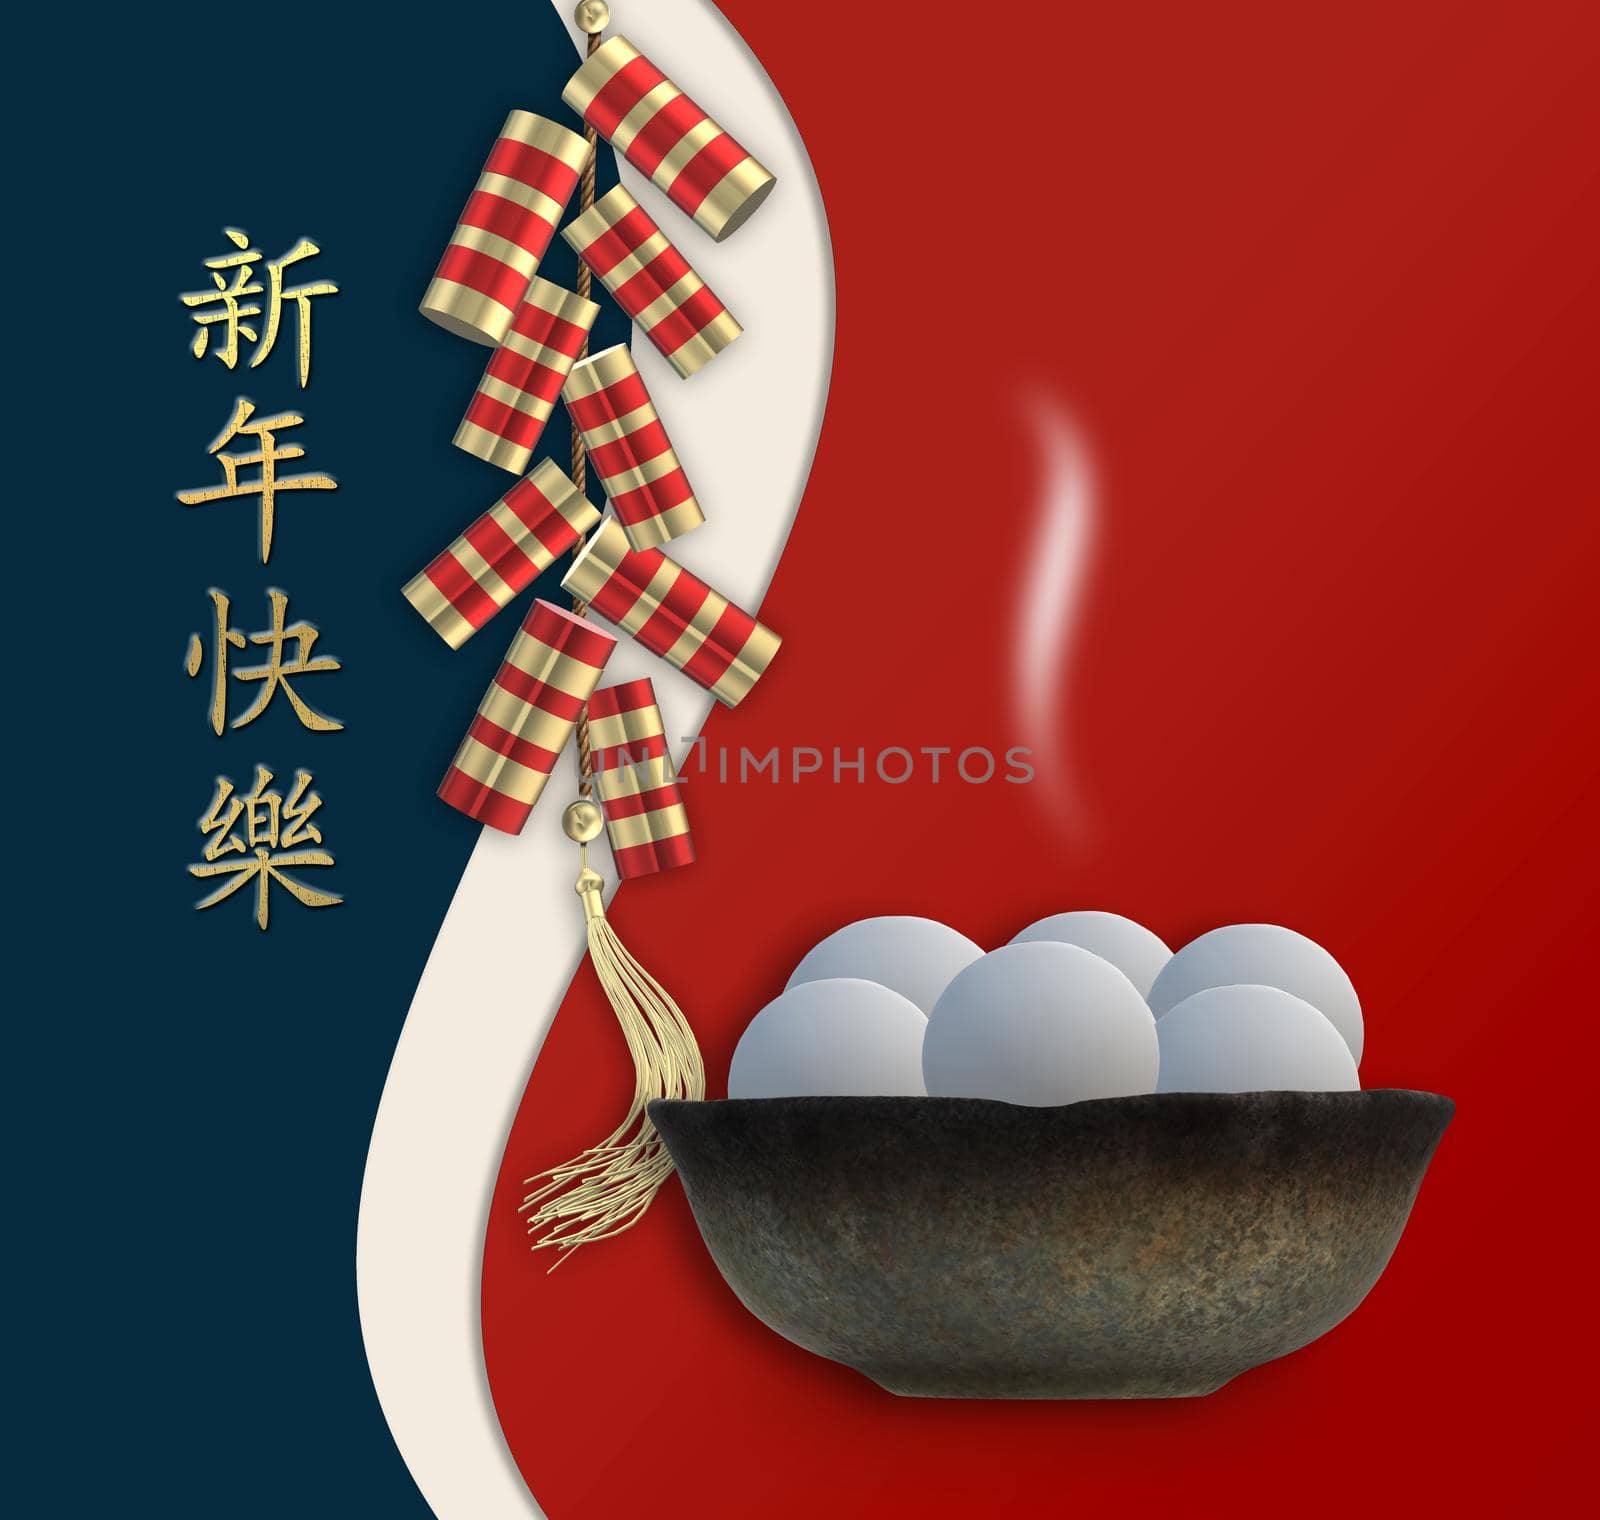 Chinese sumbols of new year festival by NelliPolk